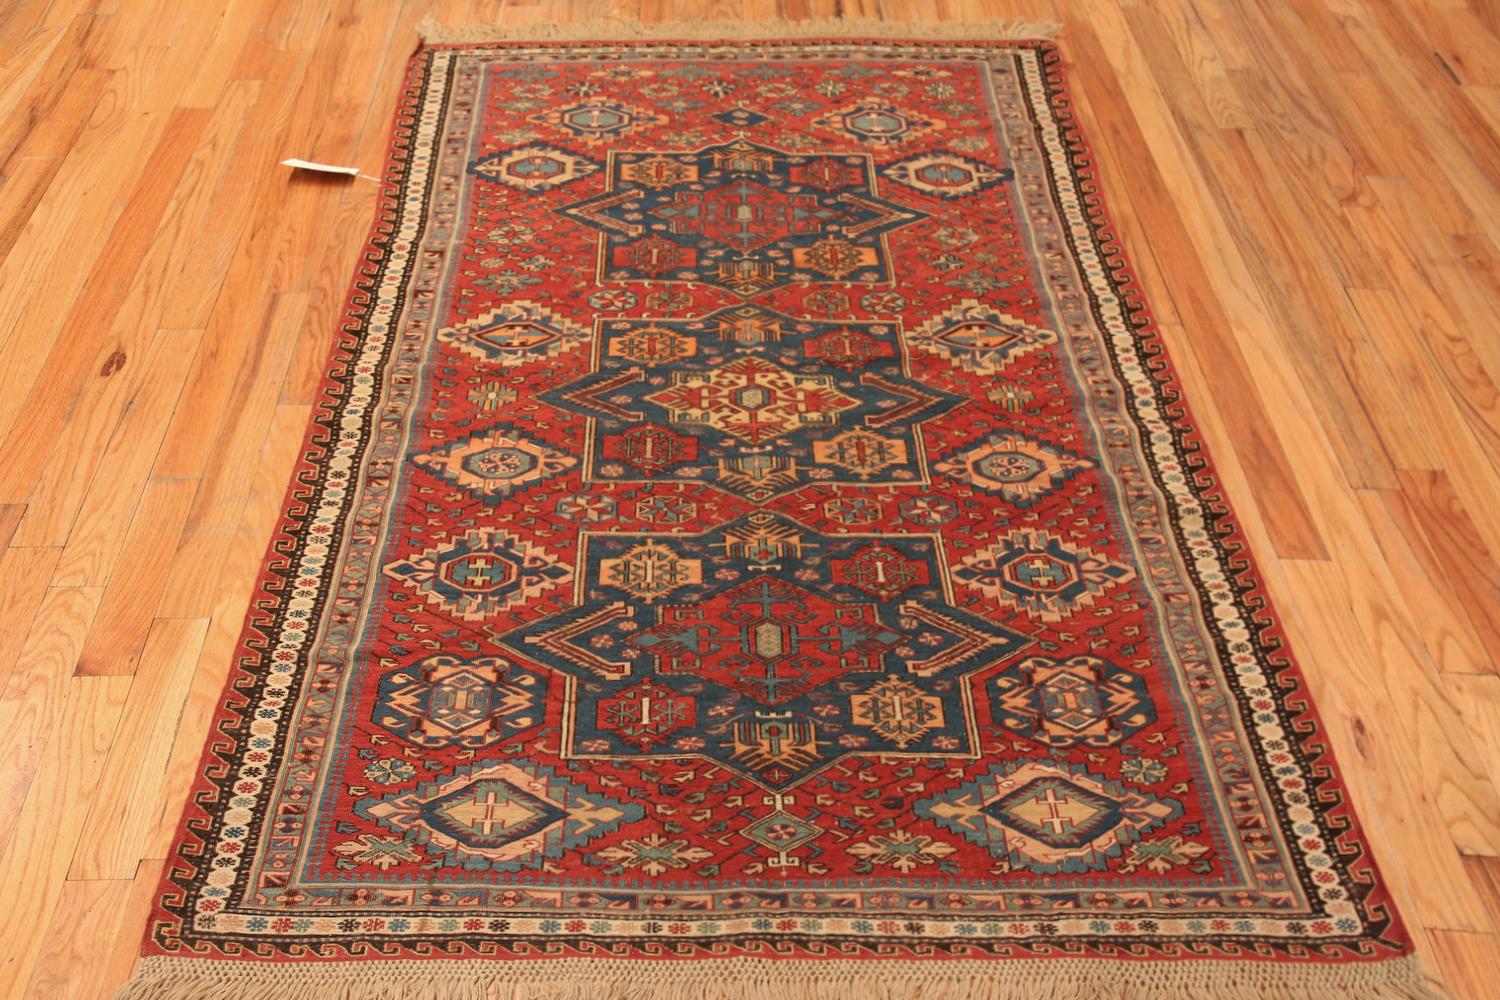 Rustic Red Beautiful Antique Caucasian Soumak Rug, Country of Origin: Caucasus, Circa Date: 1900 – The antique tribal Caucasus rugs have a unique style that makes them stand out among other antique rugs of the region. Their ancient symbols and